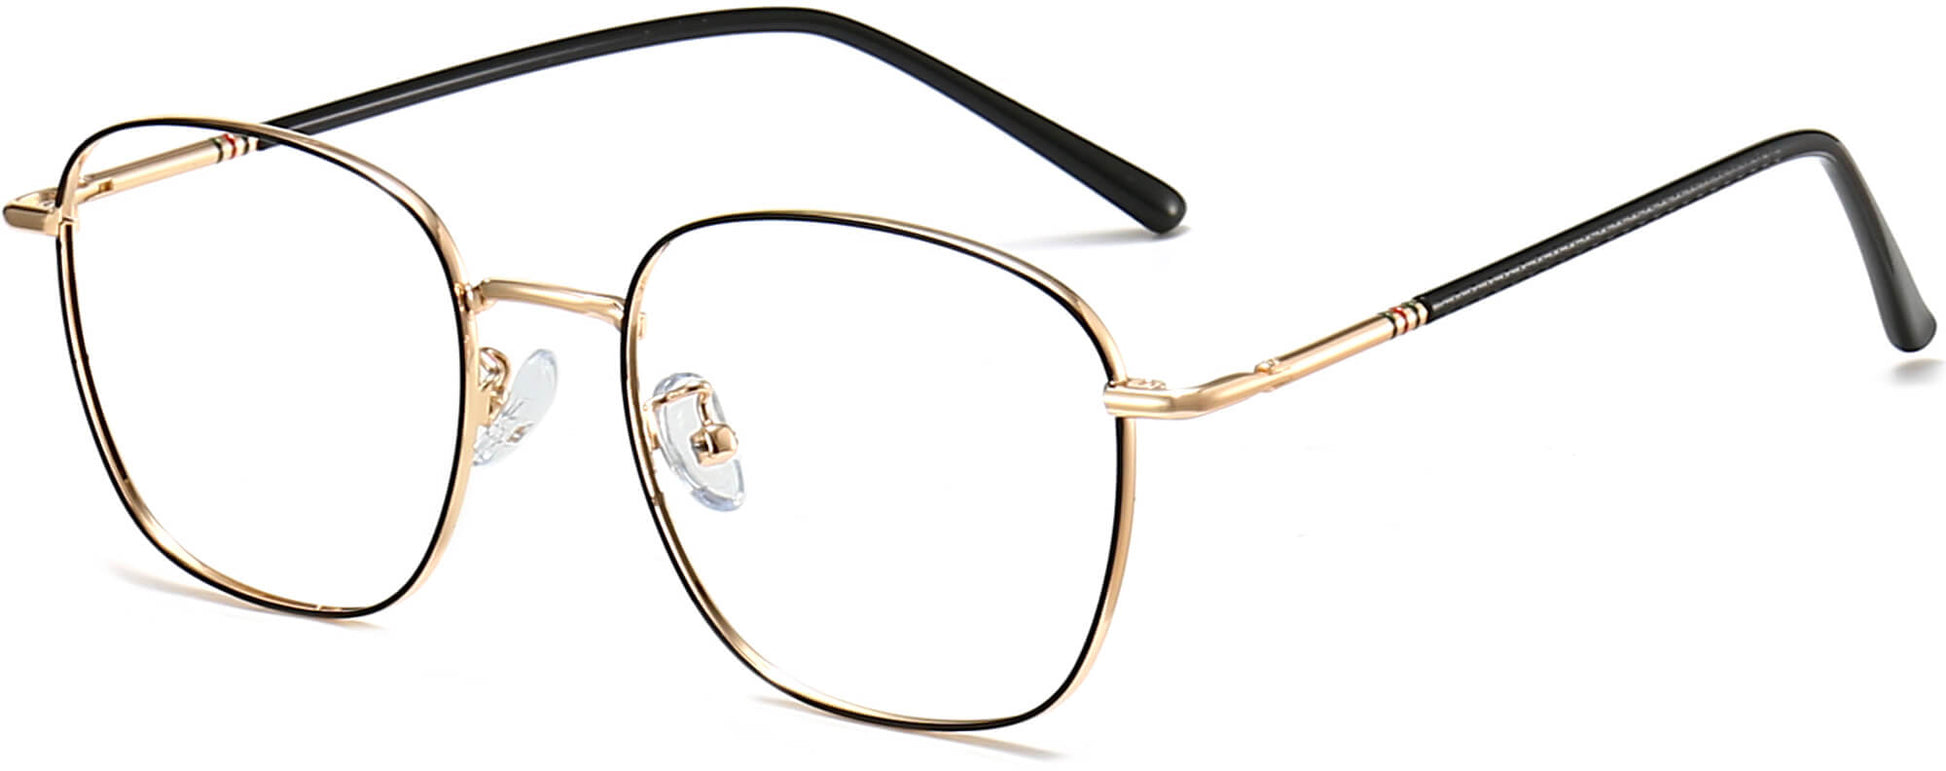 Paisley Square Black Eyeglasses from ANRRI, angle view